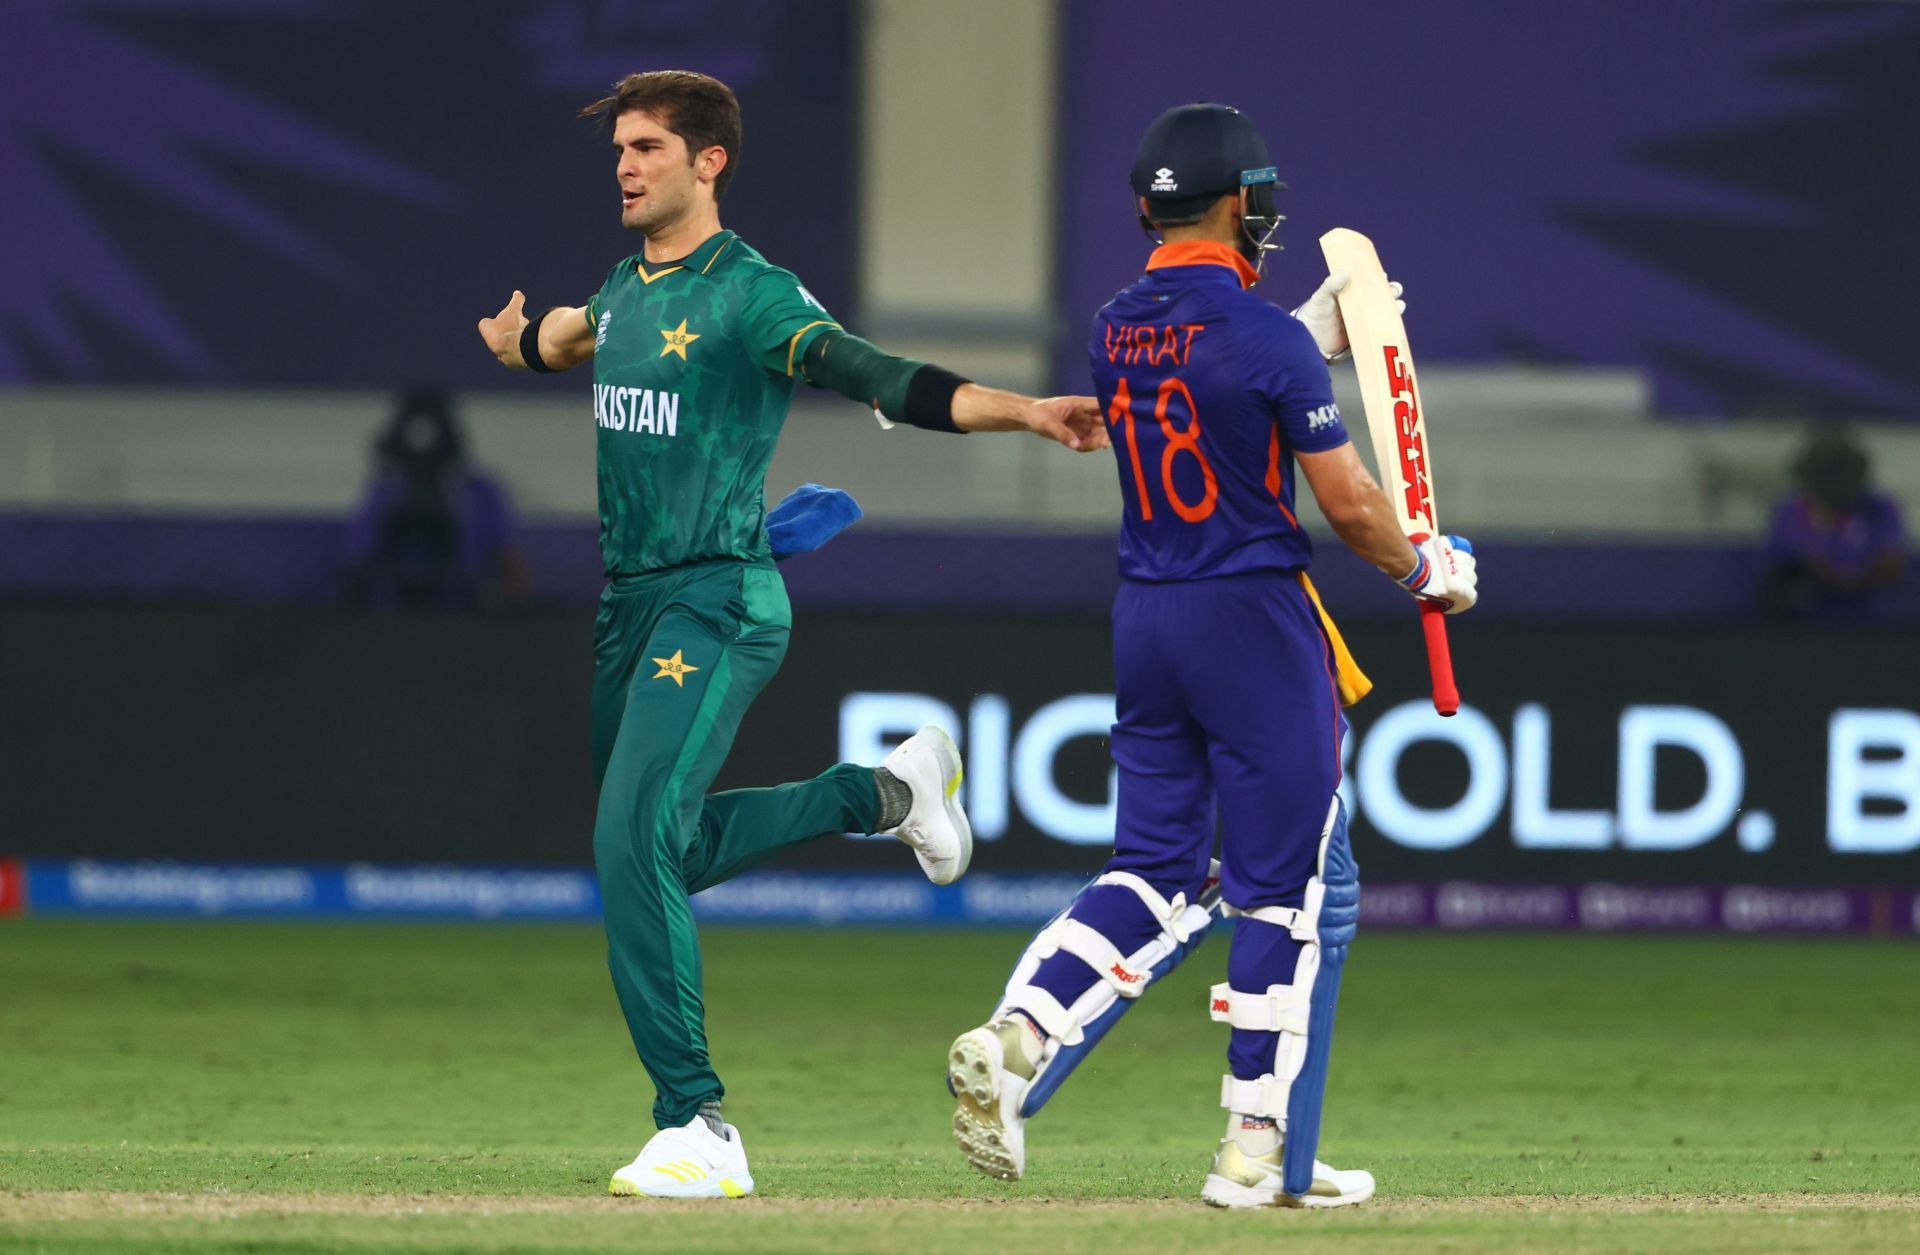 Pakistan thrashed India by 10 wickets in their last T20 World Cup meeting.